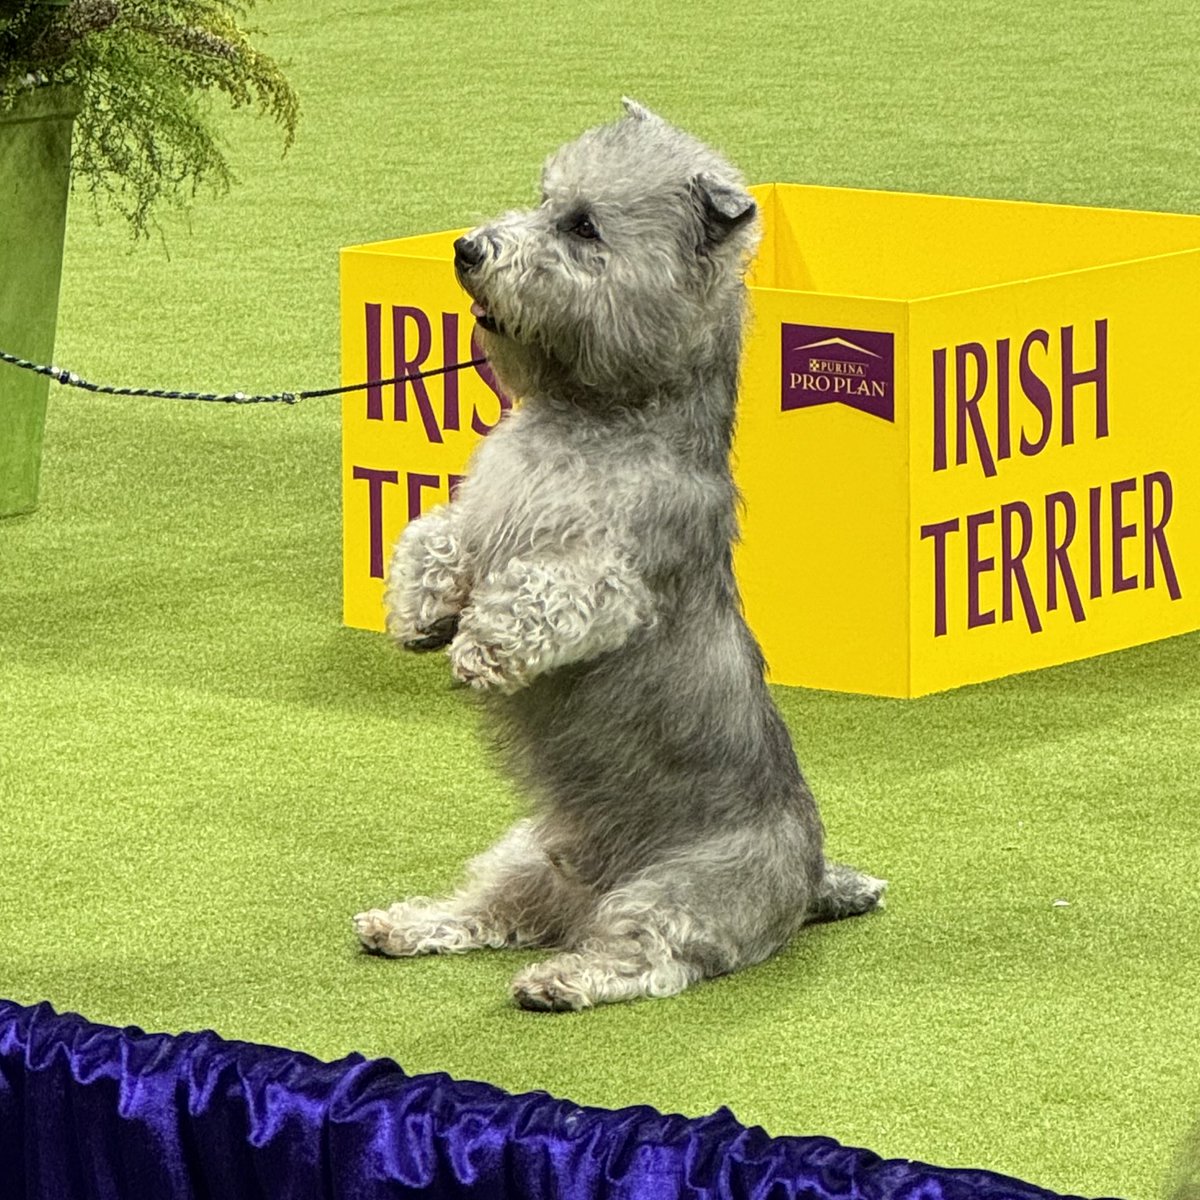 Sit back, relax, and enjoy the Terrier Group #WestminsterDogShow